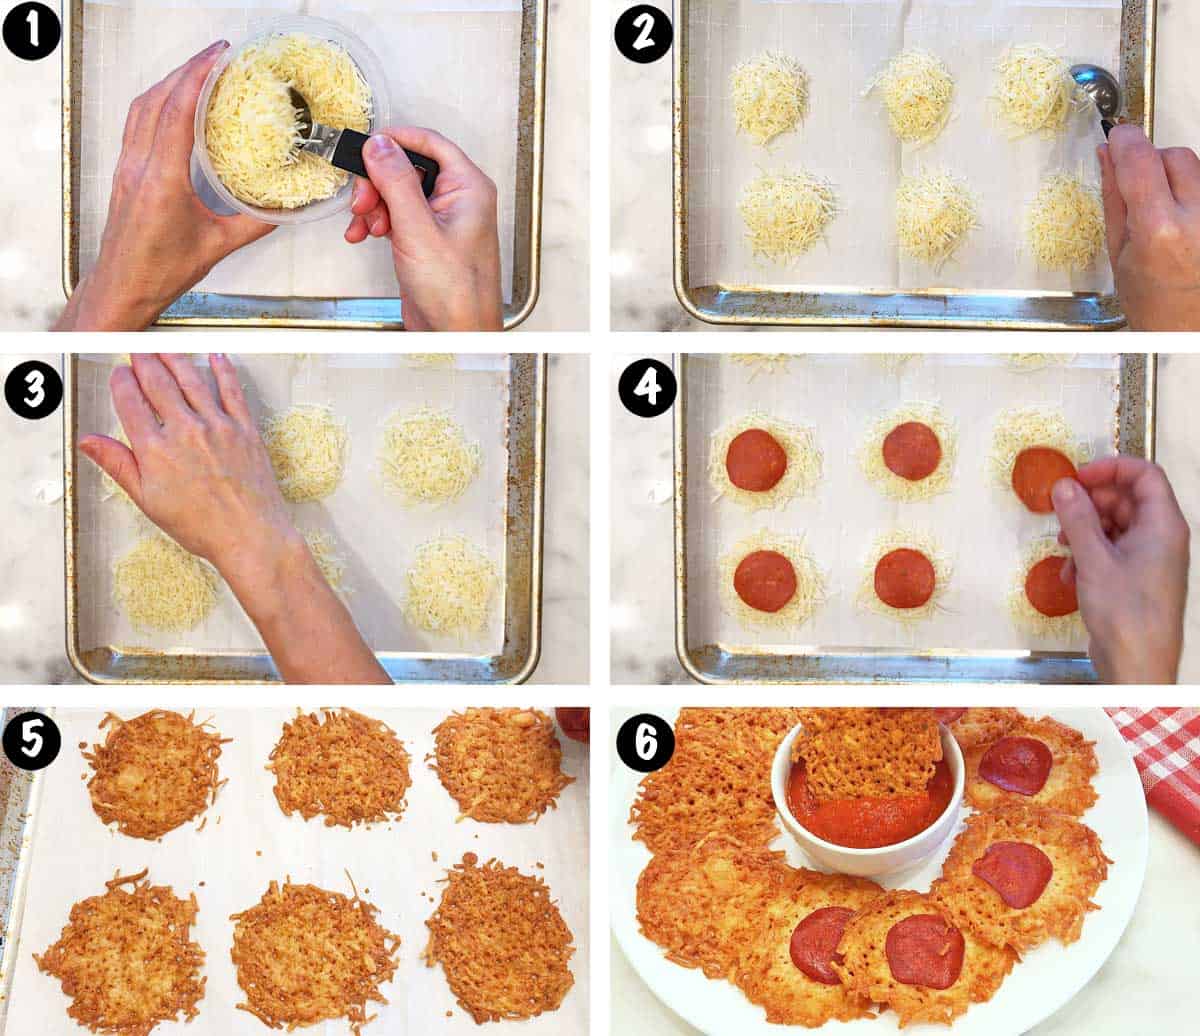 A photo collage showing the steps for making parmesan crisps. 